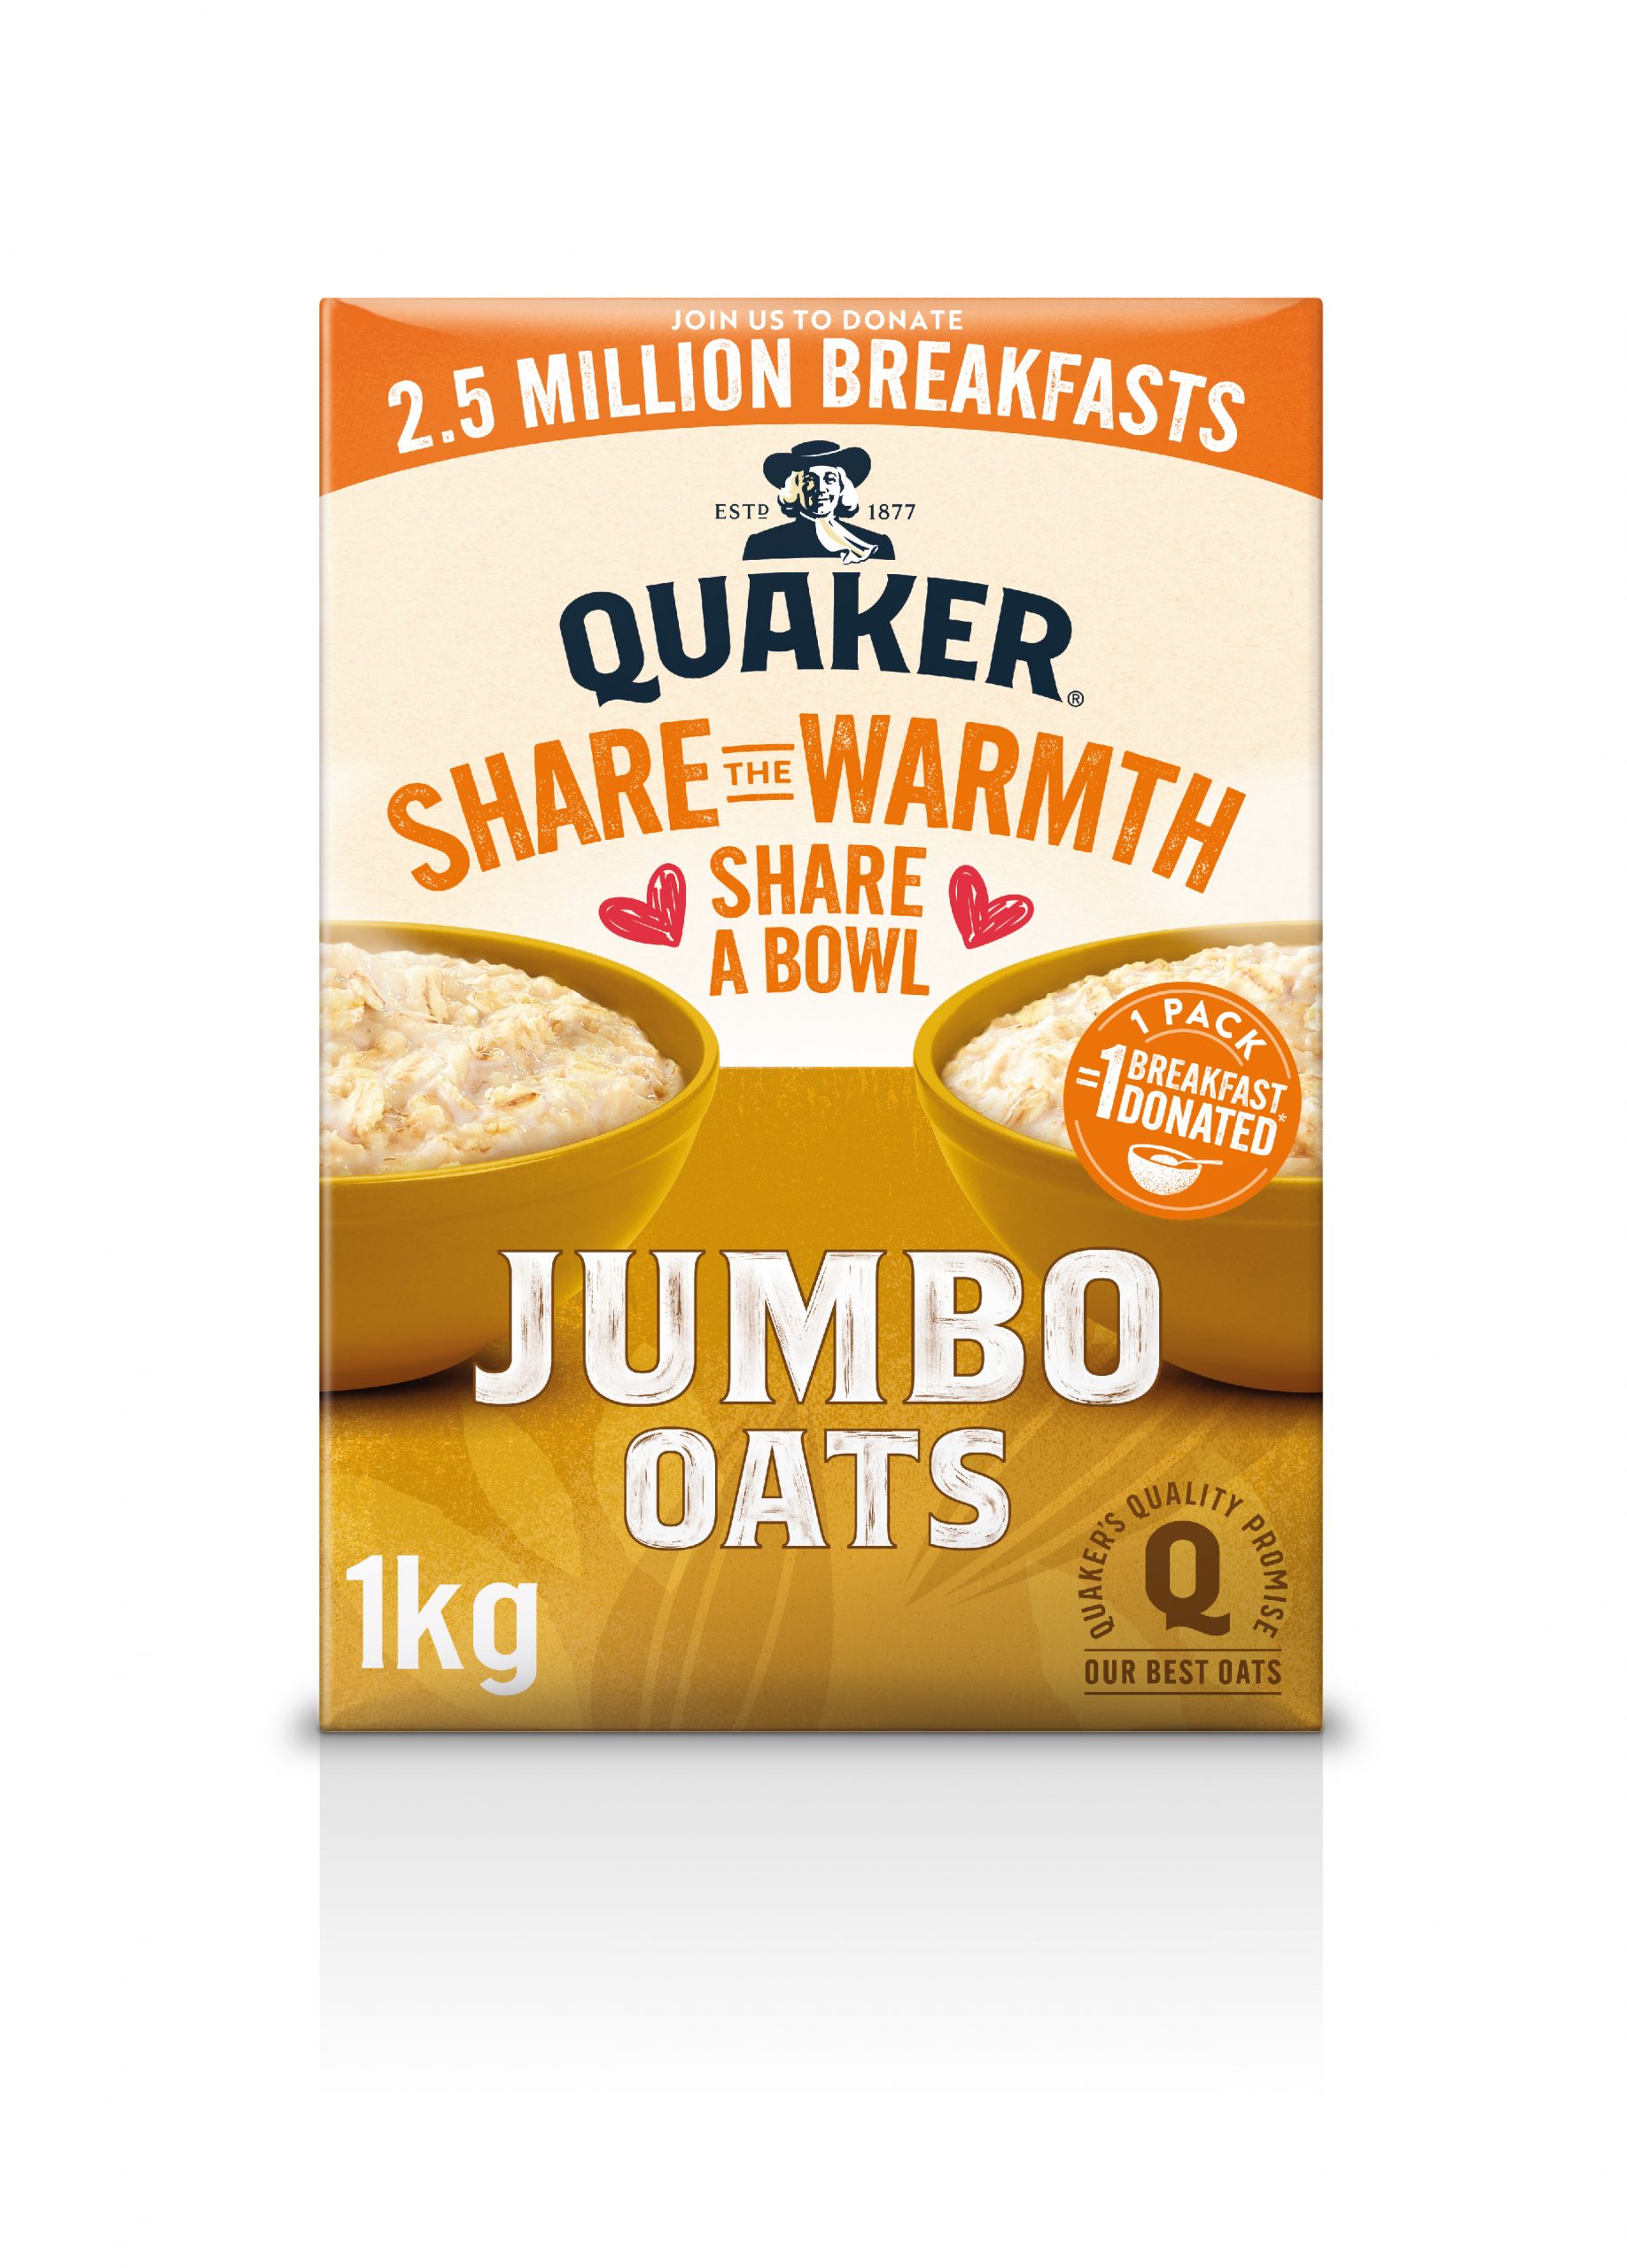 Quaker to donate up to 2.5 million warm breakfasts to those in need